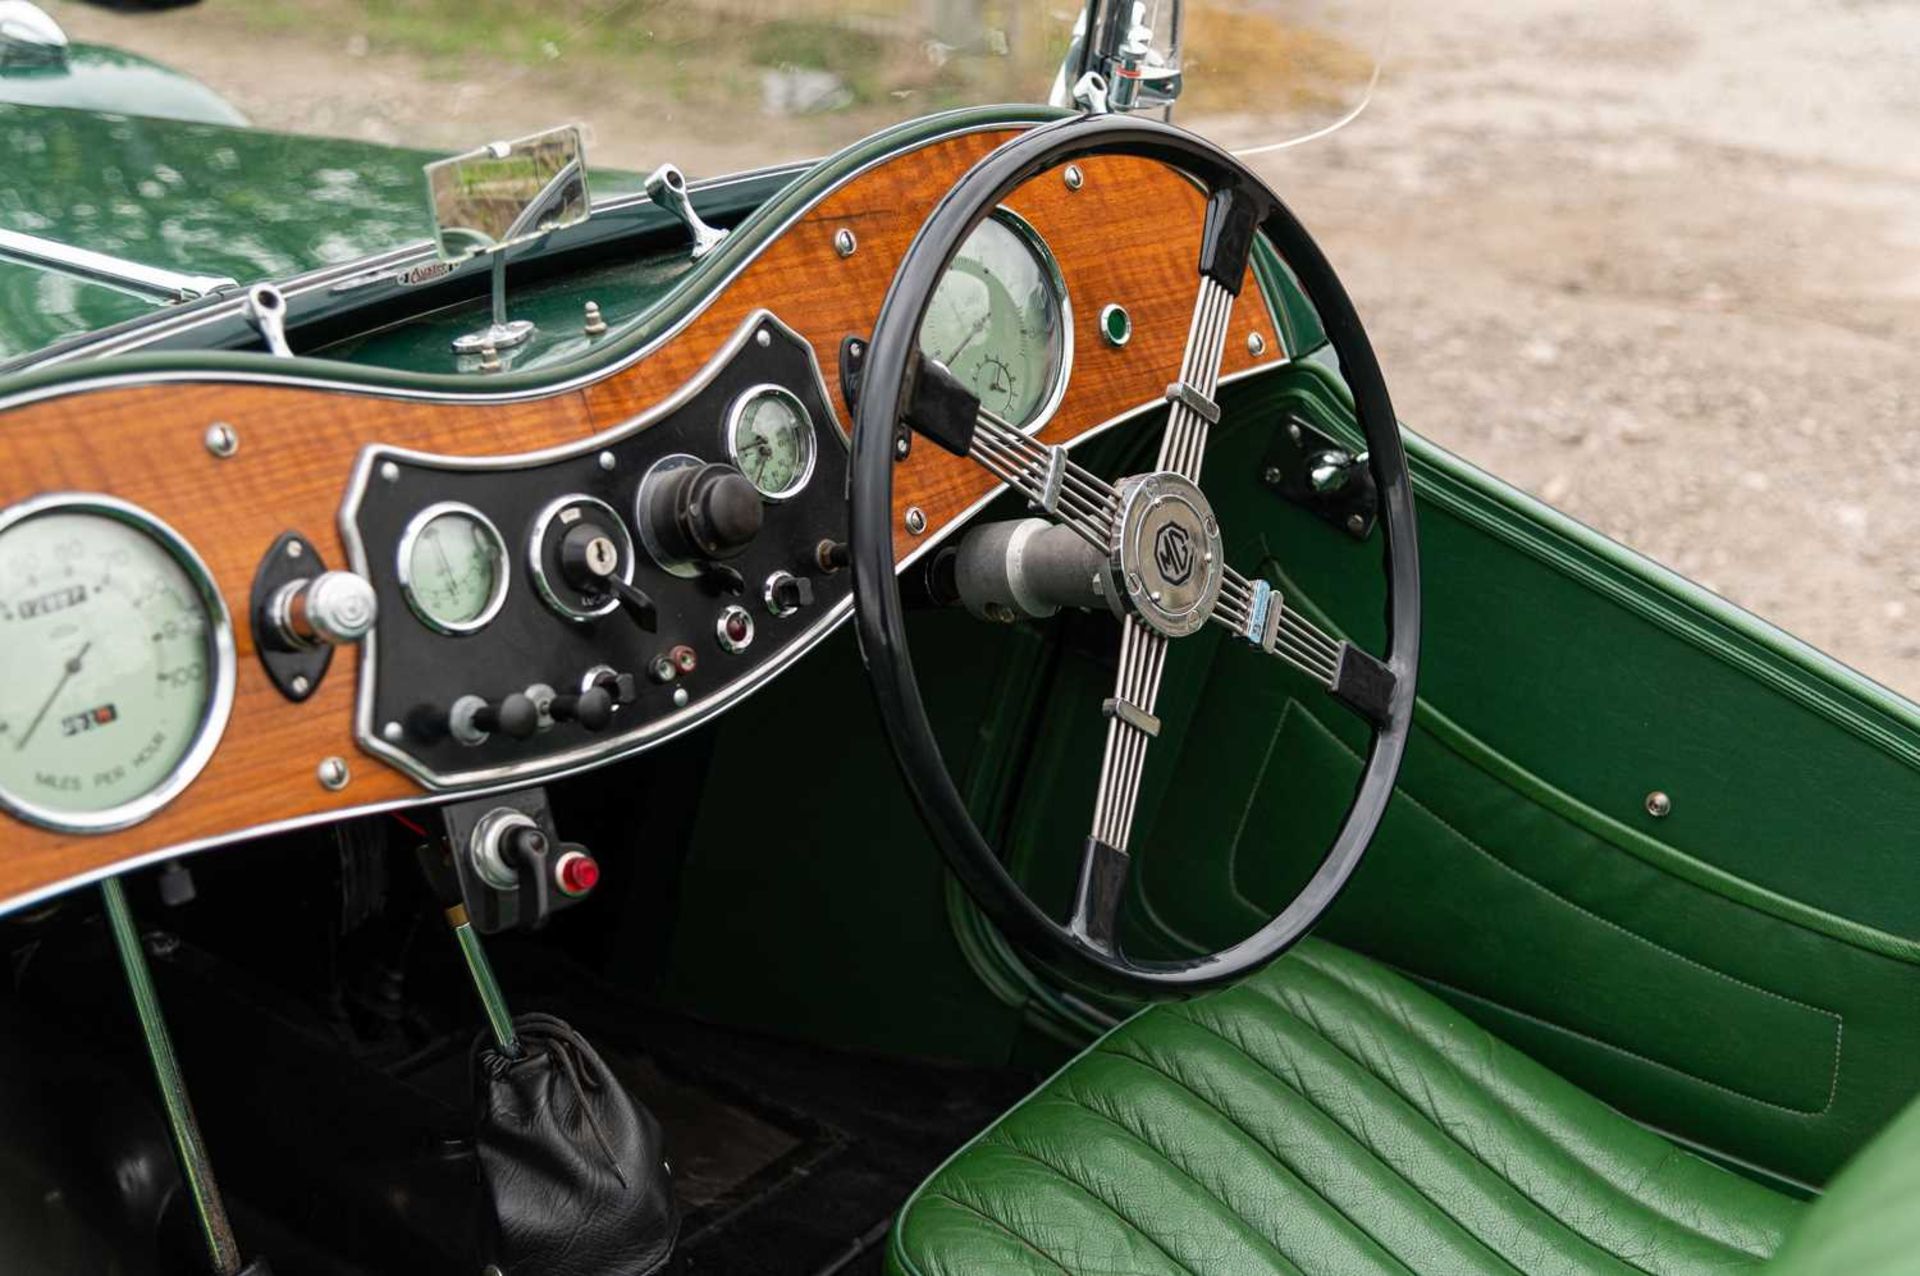 1947 MG TC Midget  Fully restored, right-hand-drive UK home market example - Image 59 of 76